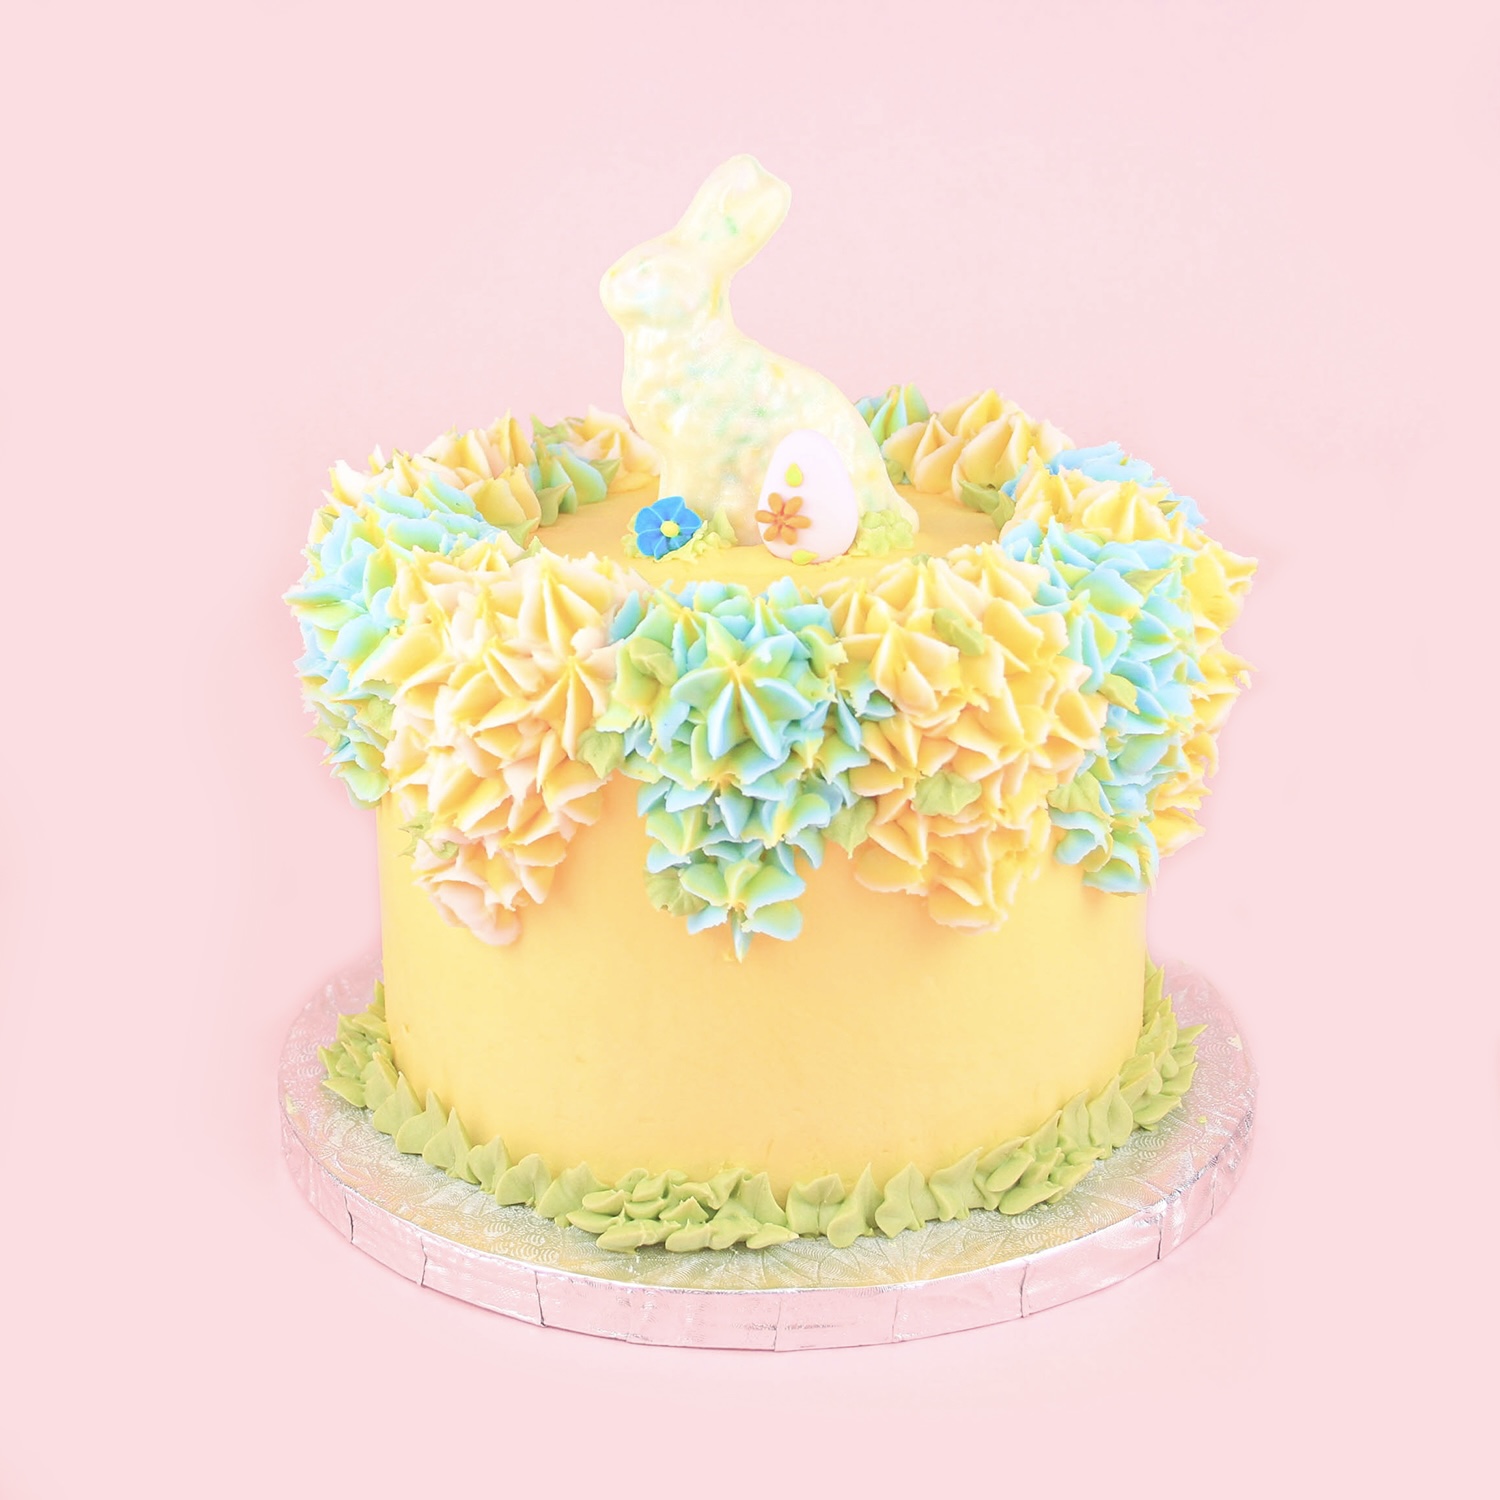 Floral Bunny Easter Cake